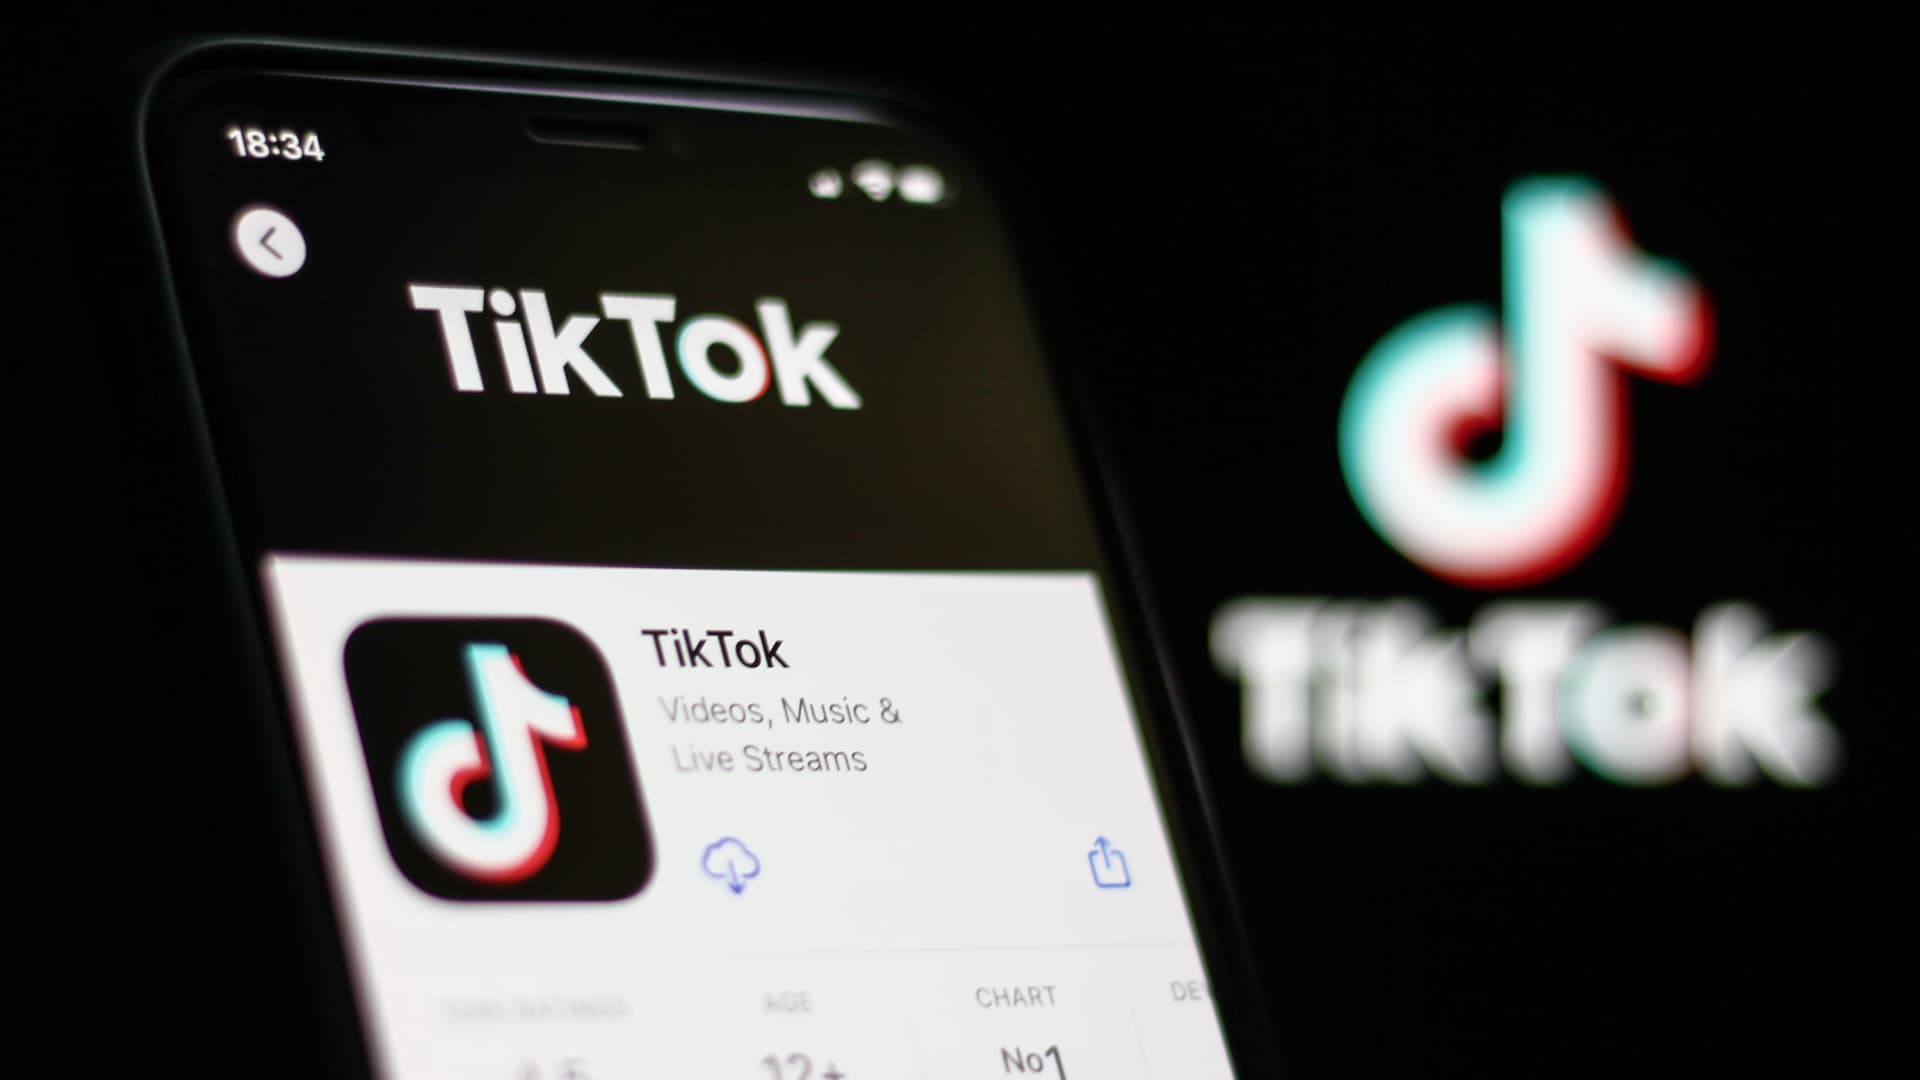 TikTok's online marketplace for the US could launch in August